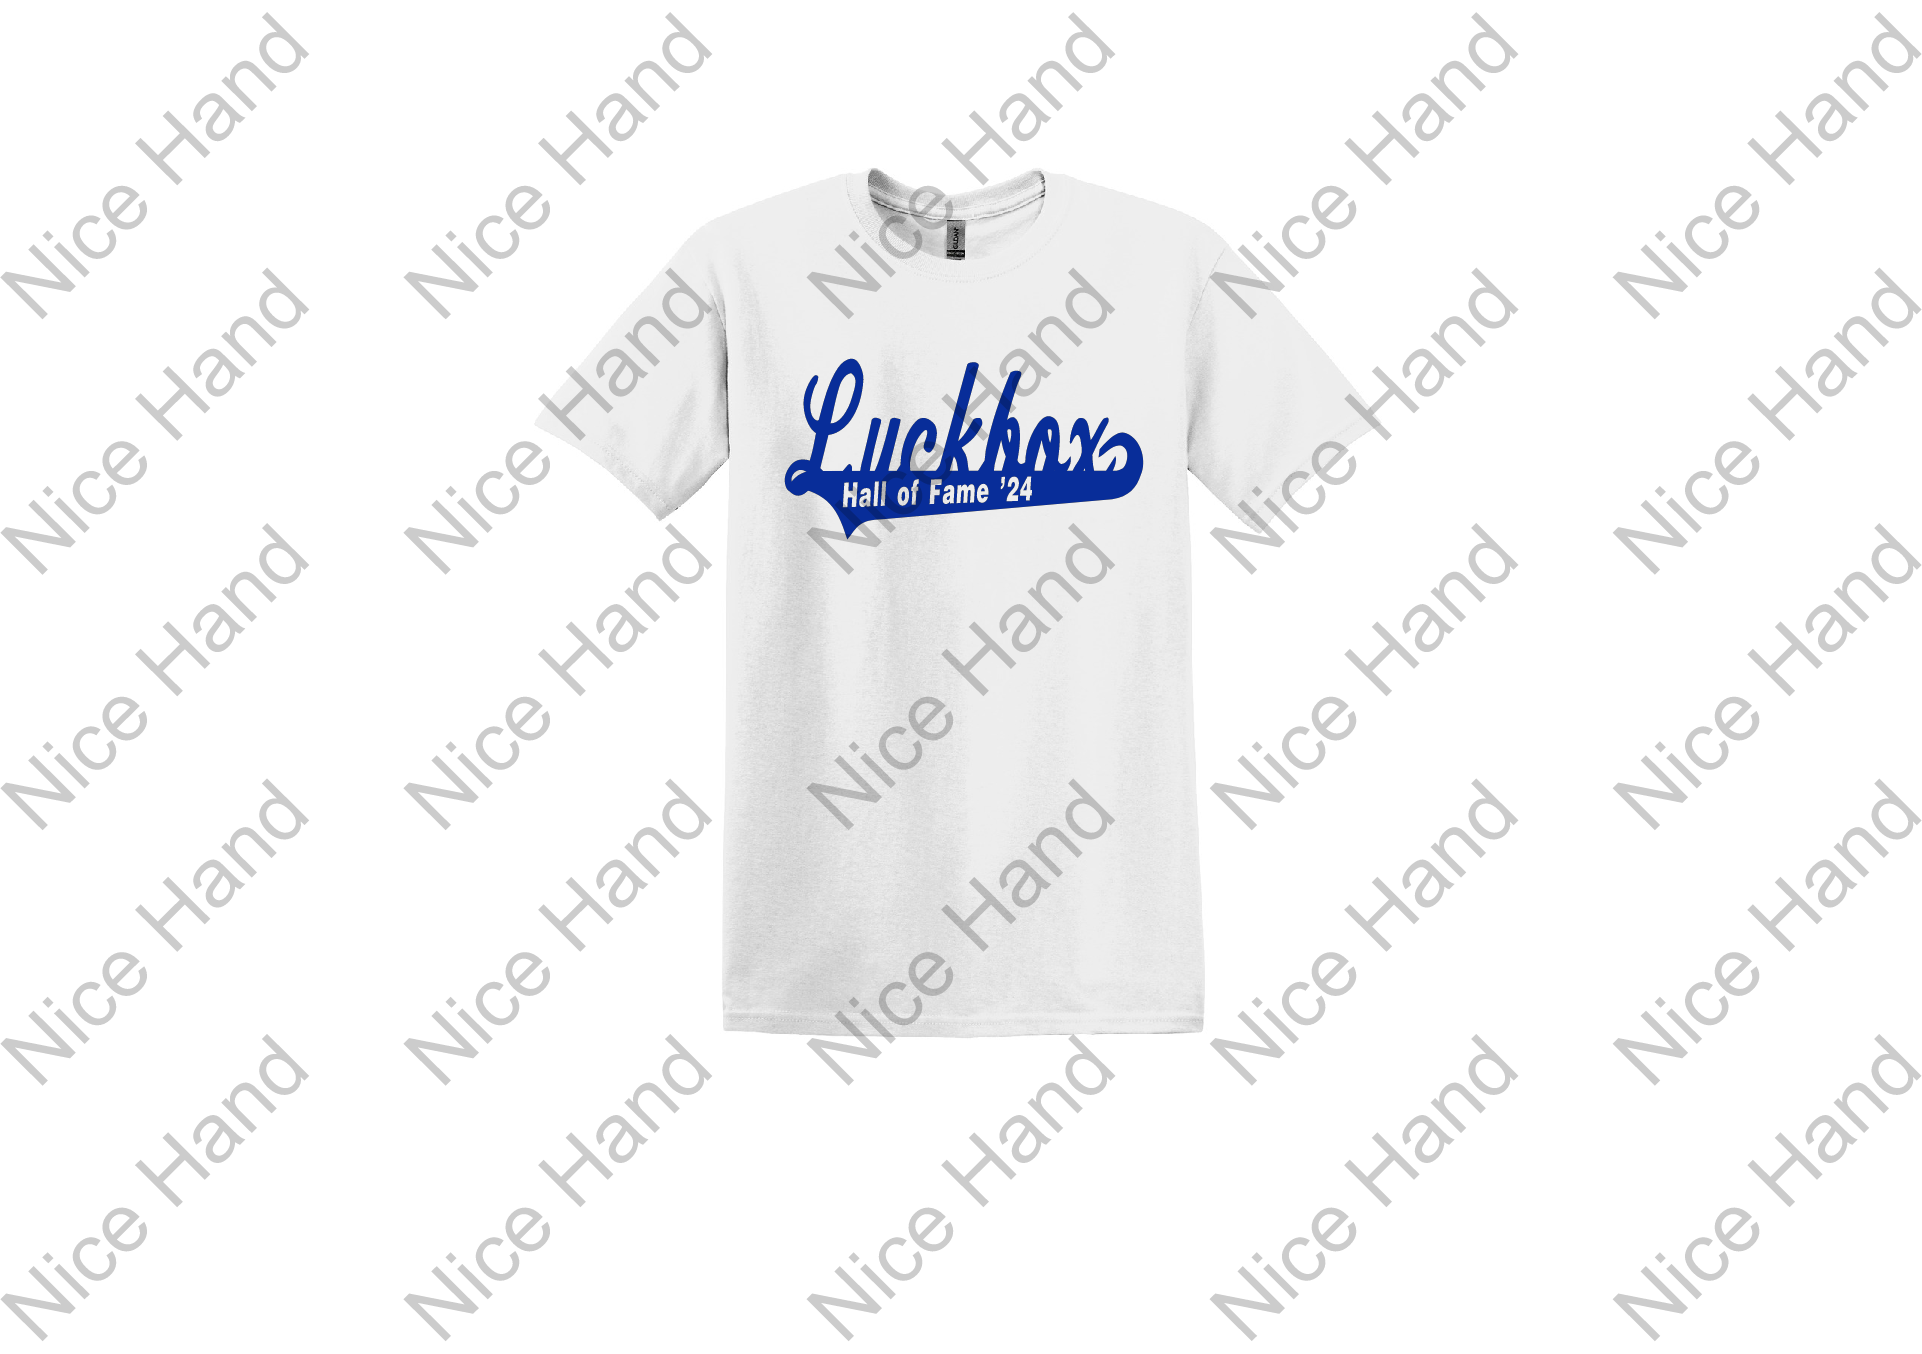 Luckbox hall of fame. White with Blue Lettering